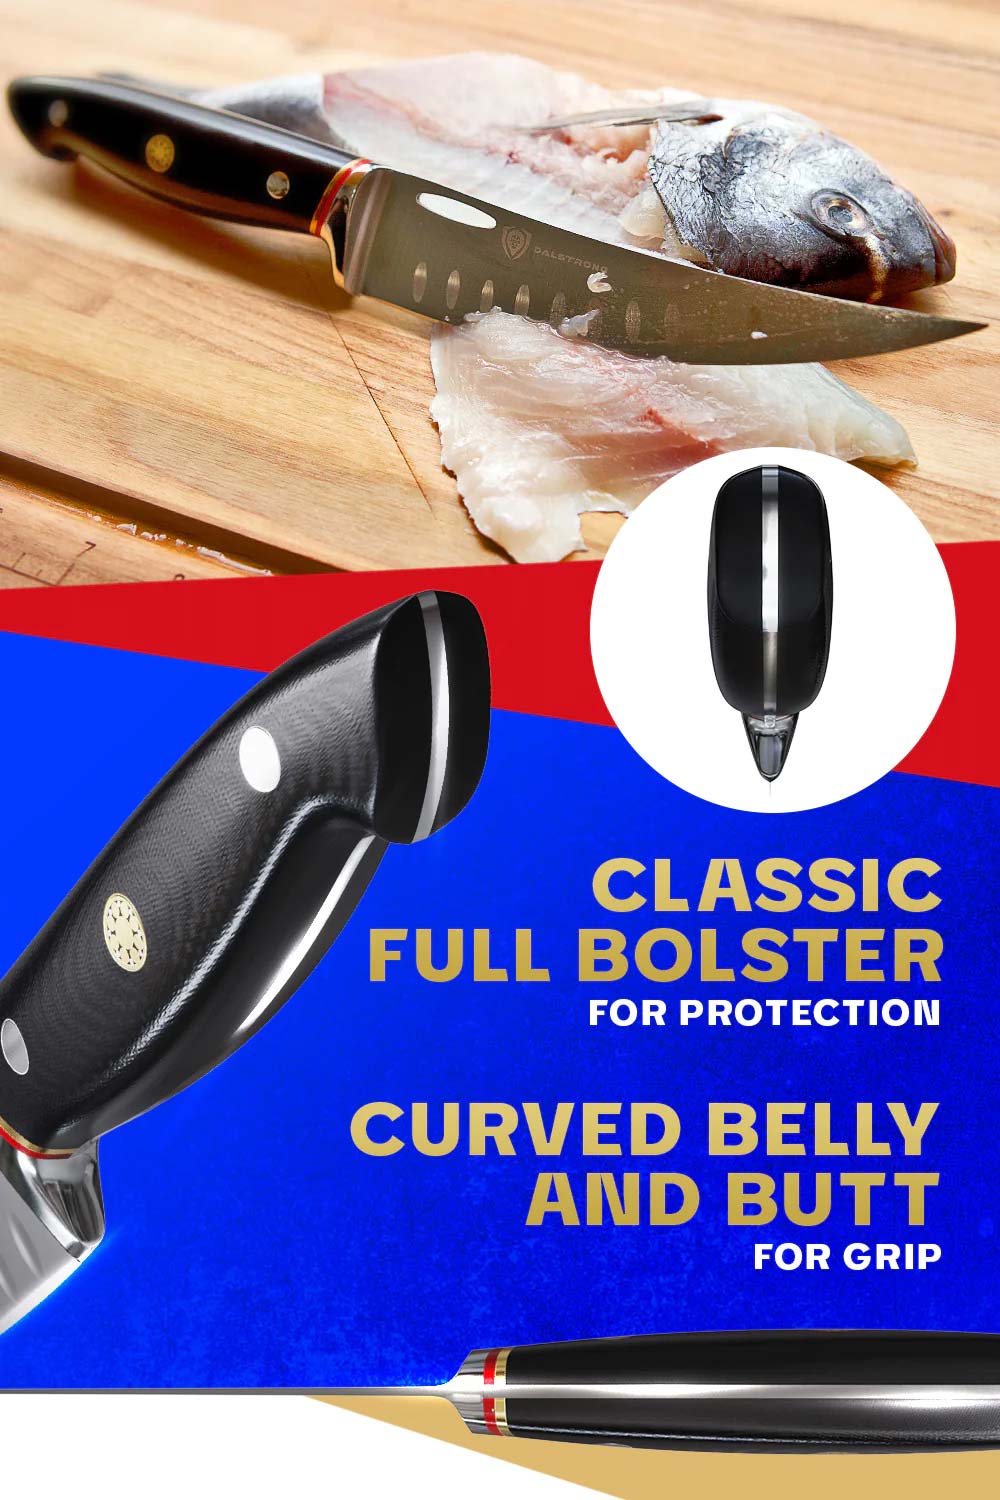 Dalstrong centurion series 6 inch curved boning knife featuring it's comfortable handle design.